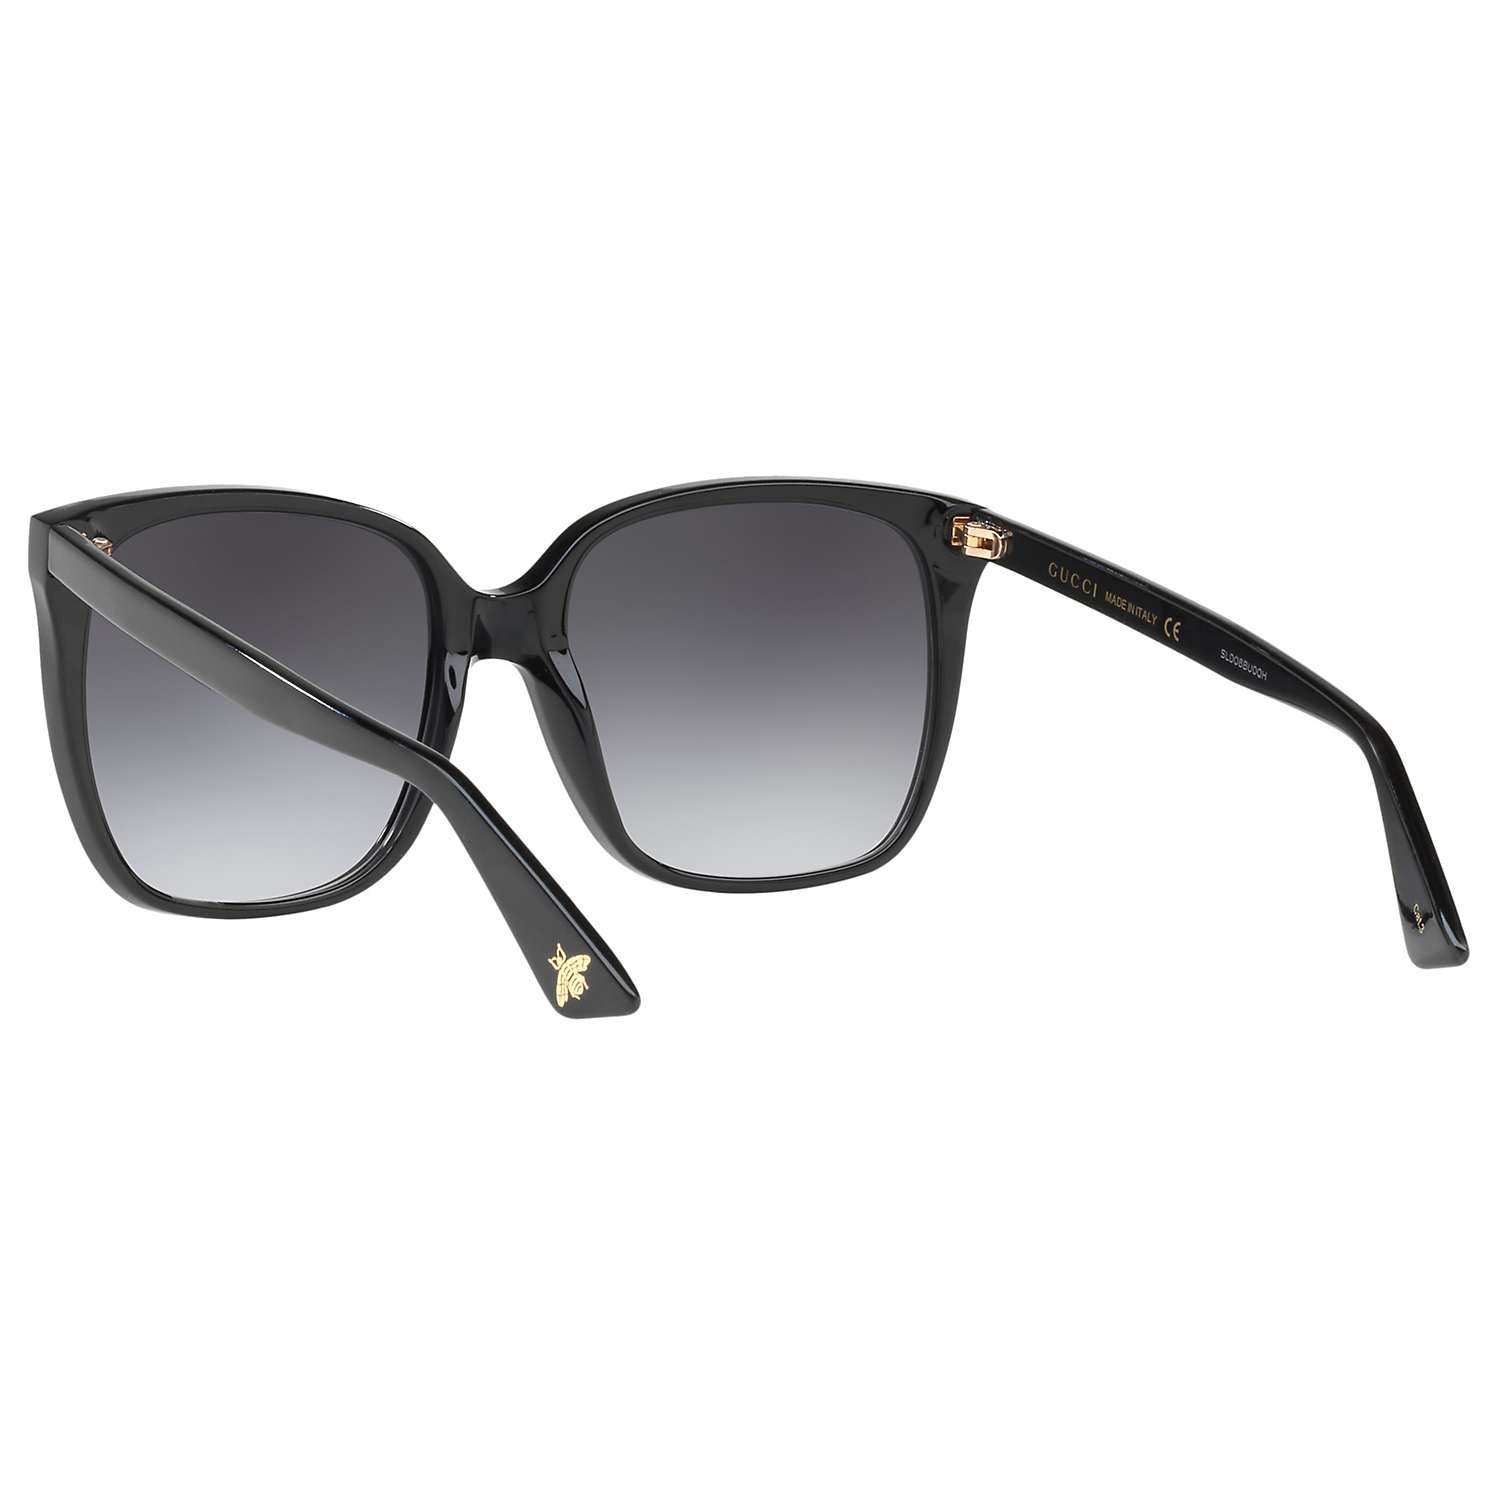 Buy Gucci GG0022S Square Sunglasses Online at johnlewis.com